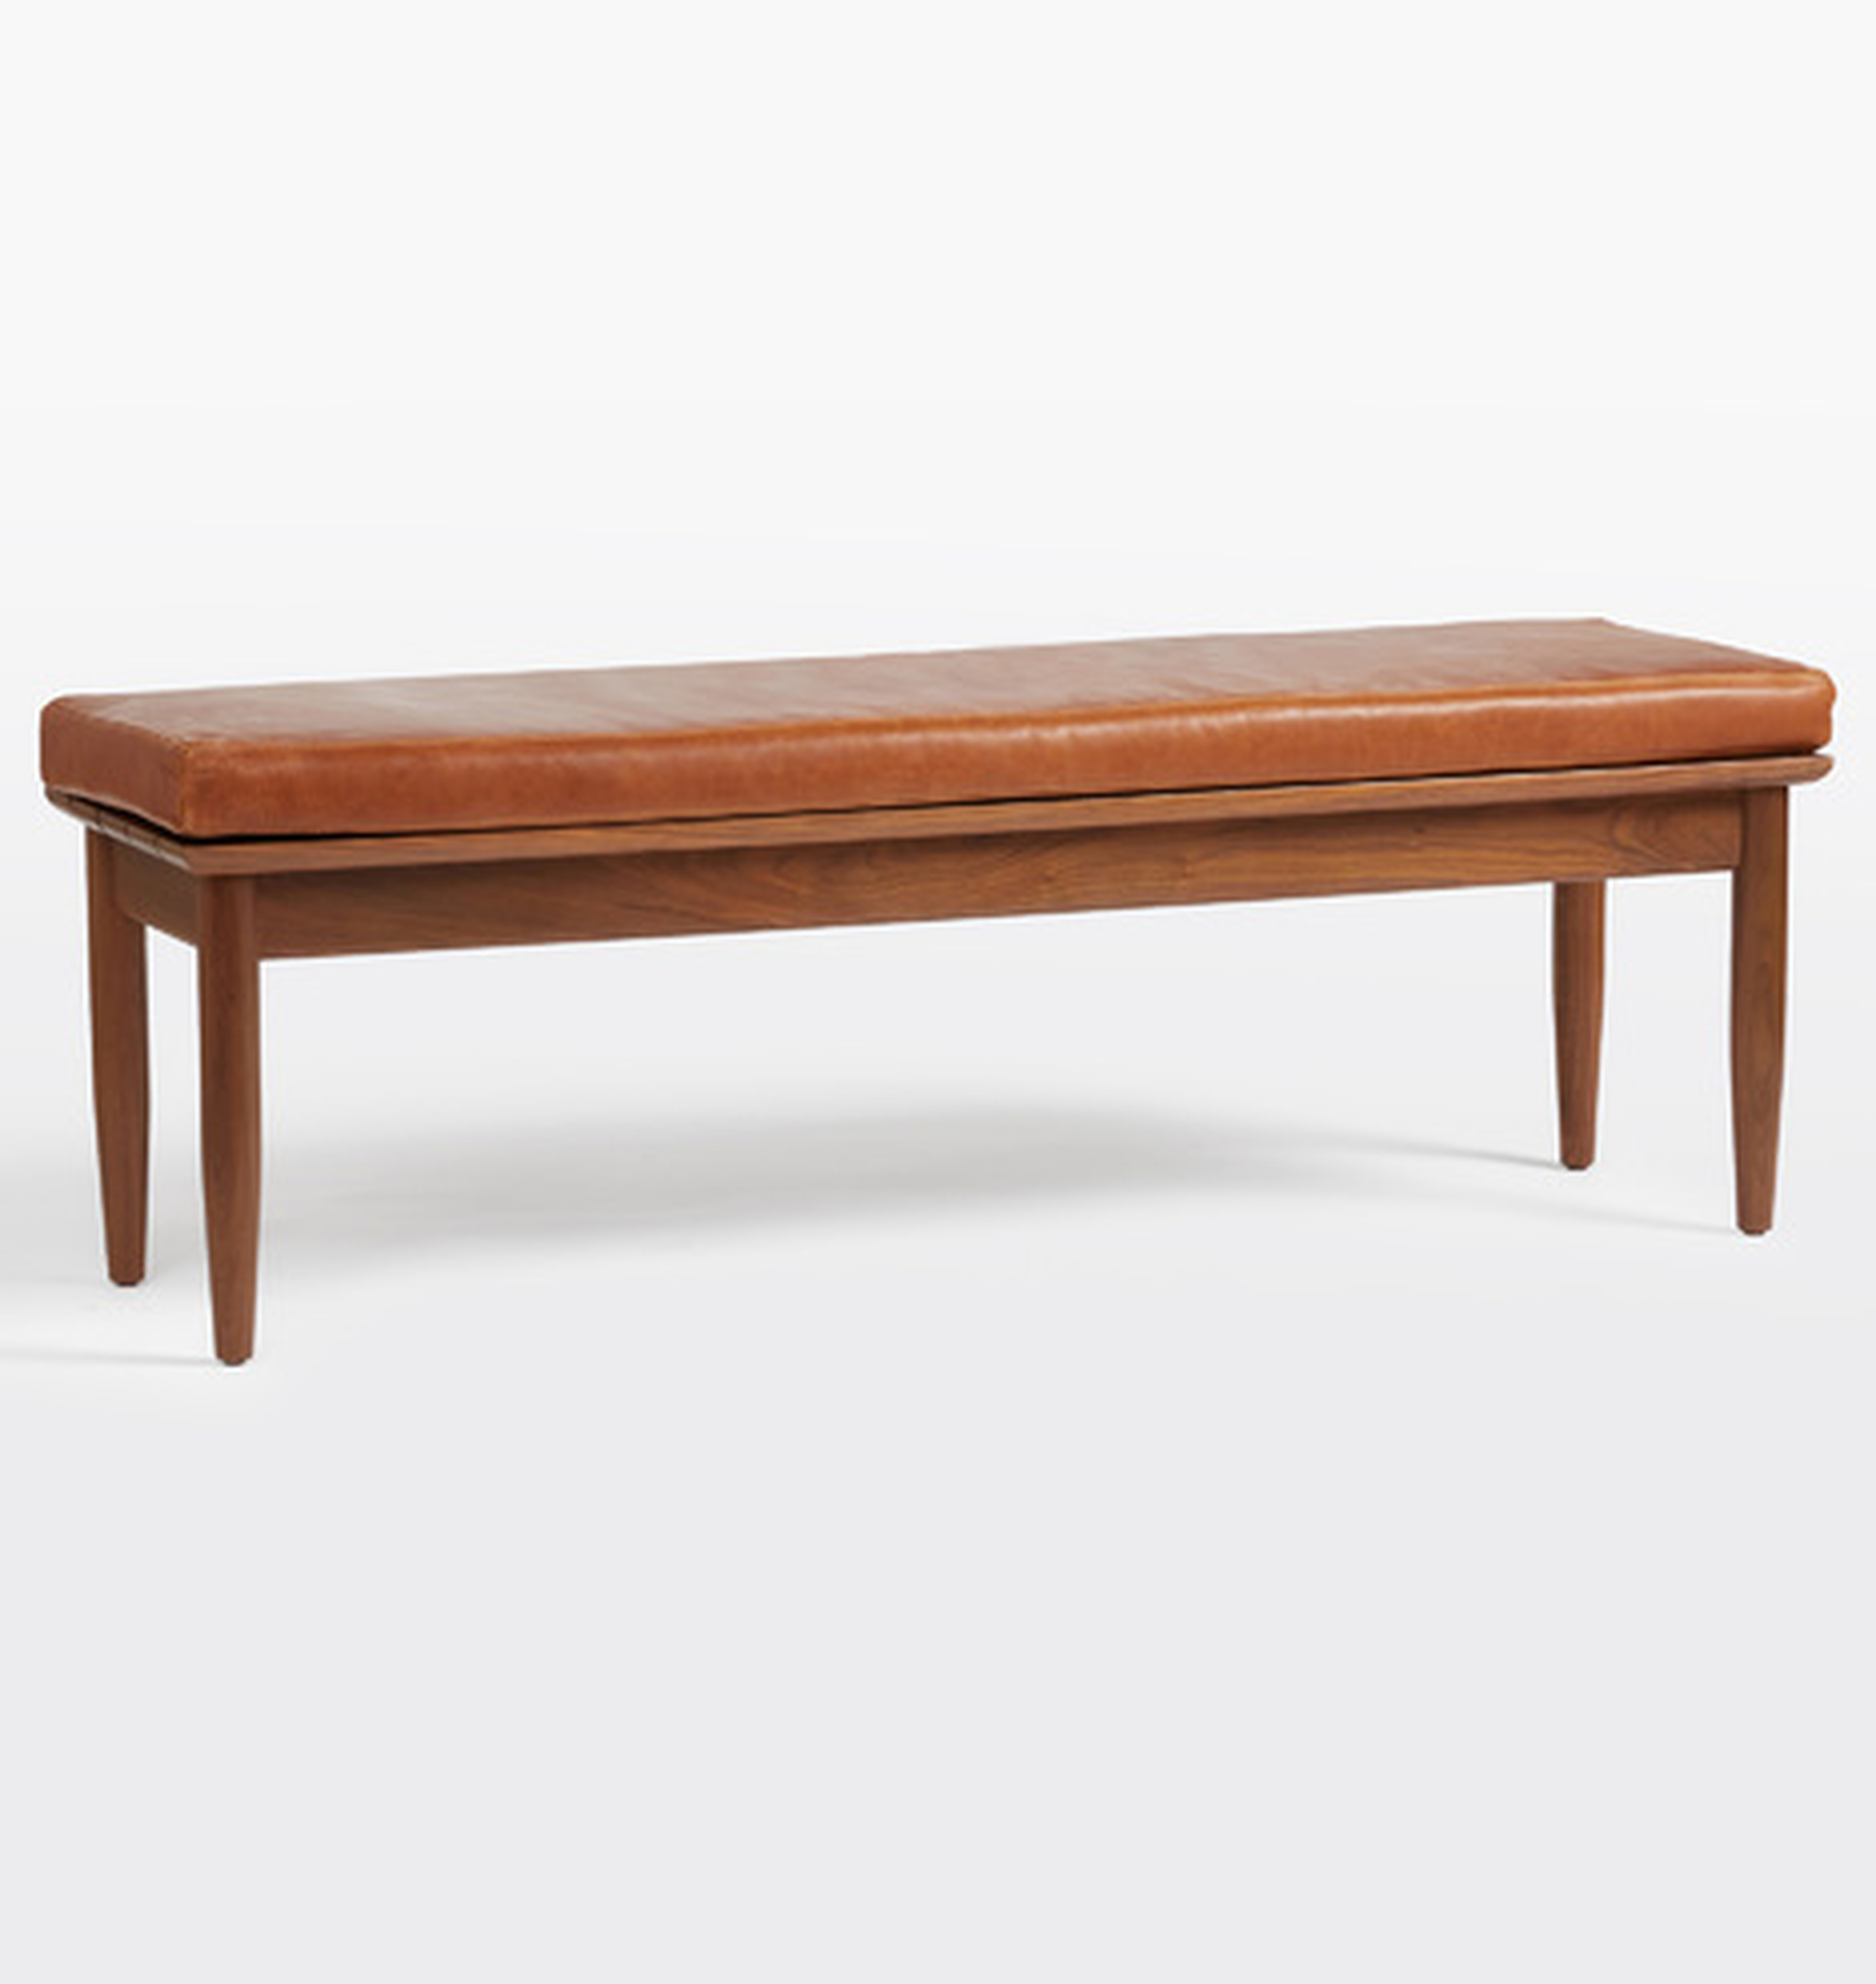 Shaw Bench with Leather Cushion - Rejuvenation